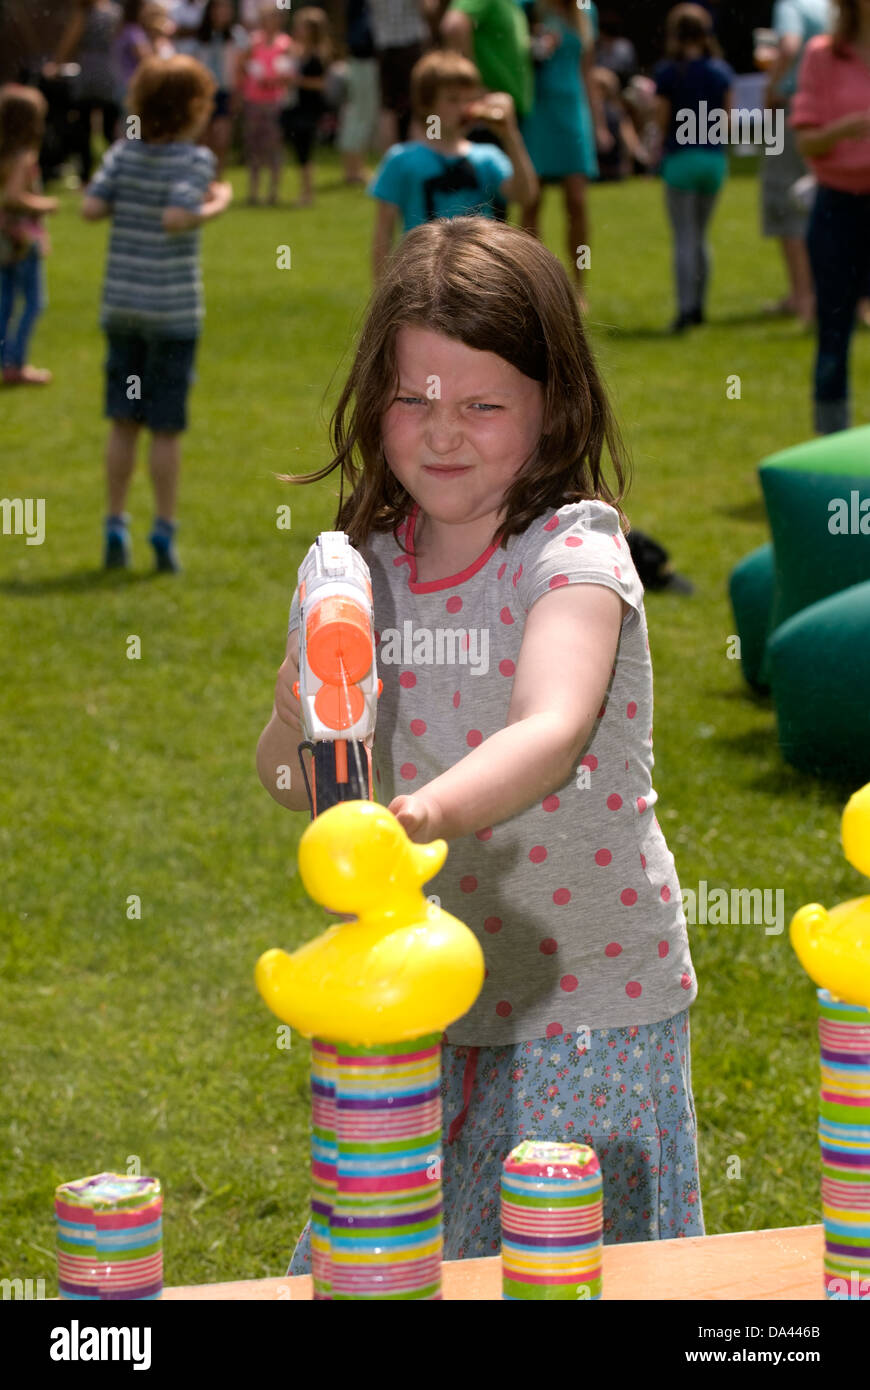 7 year old girl at summer fete using water pistol to squirt plastic ducks, Sheet, Hampshire, UK. Stock Photo